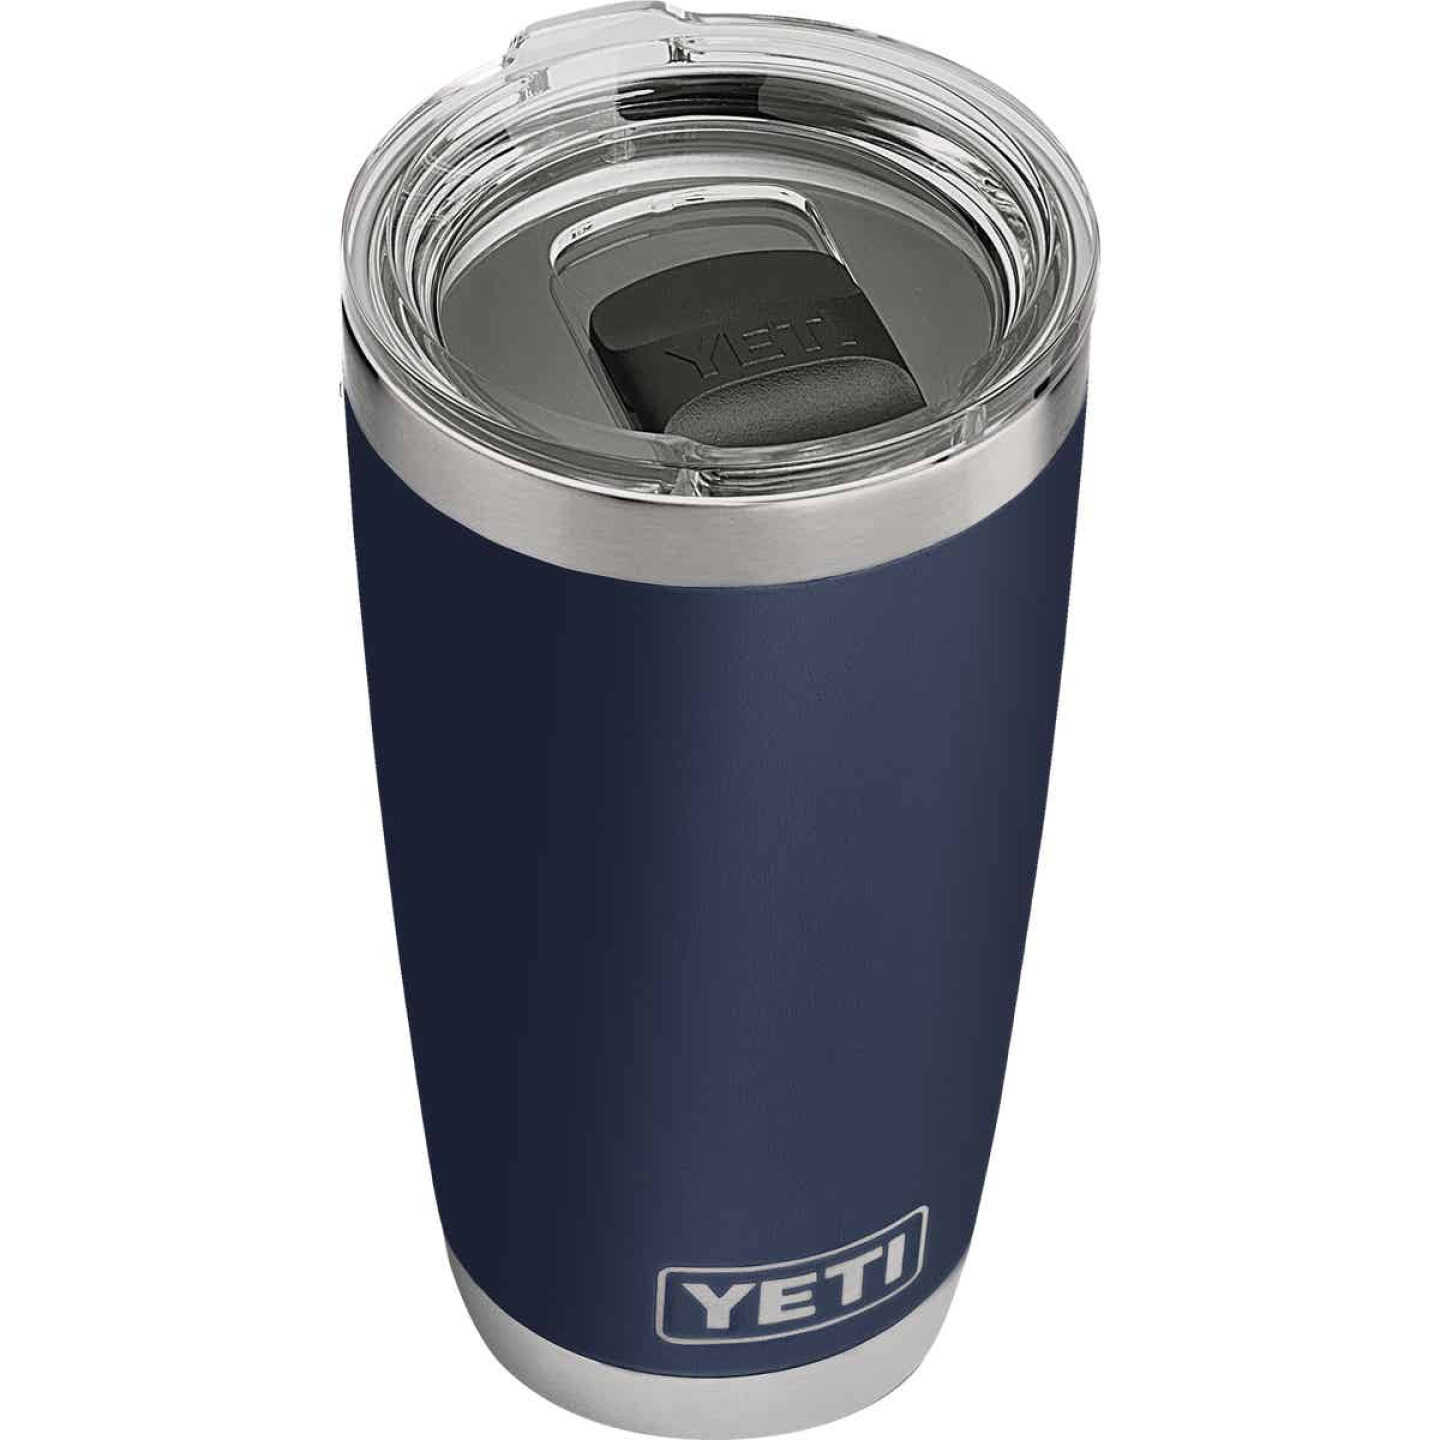 YETI Rambler 24 oz Mug, Vacuum Insulated, Stainless Steel with MagSlider  Lid, Navy